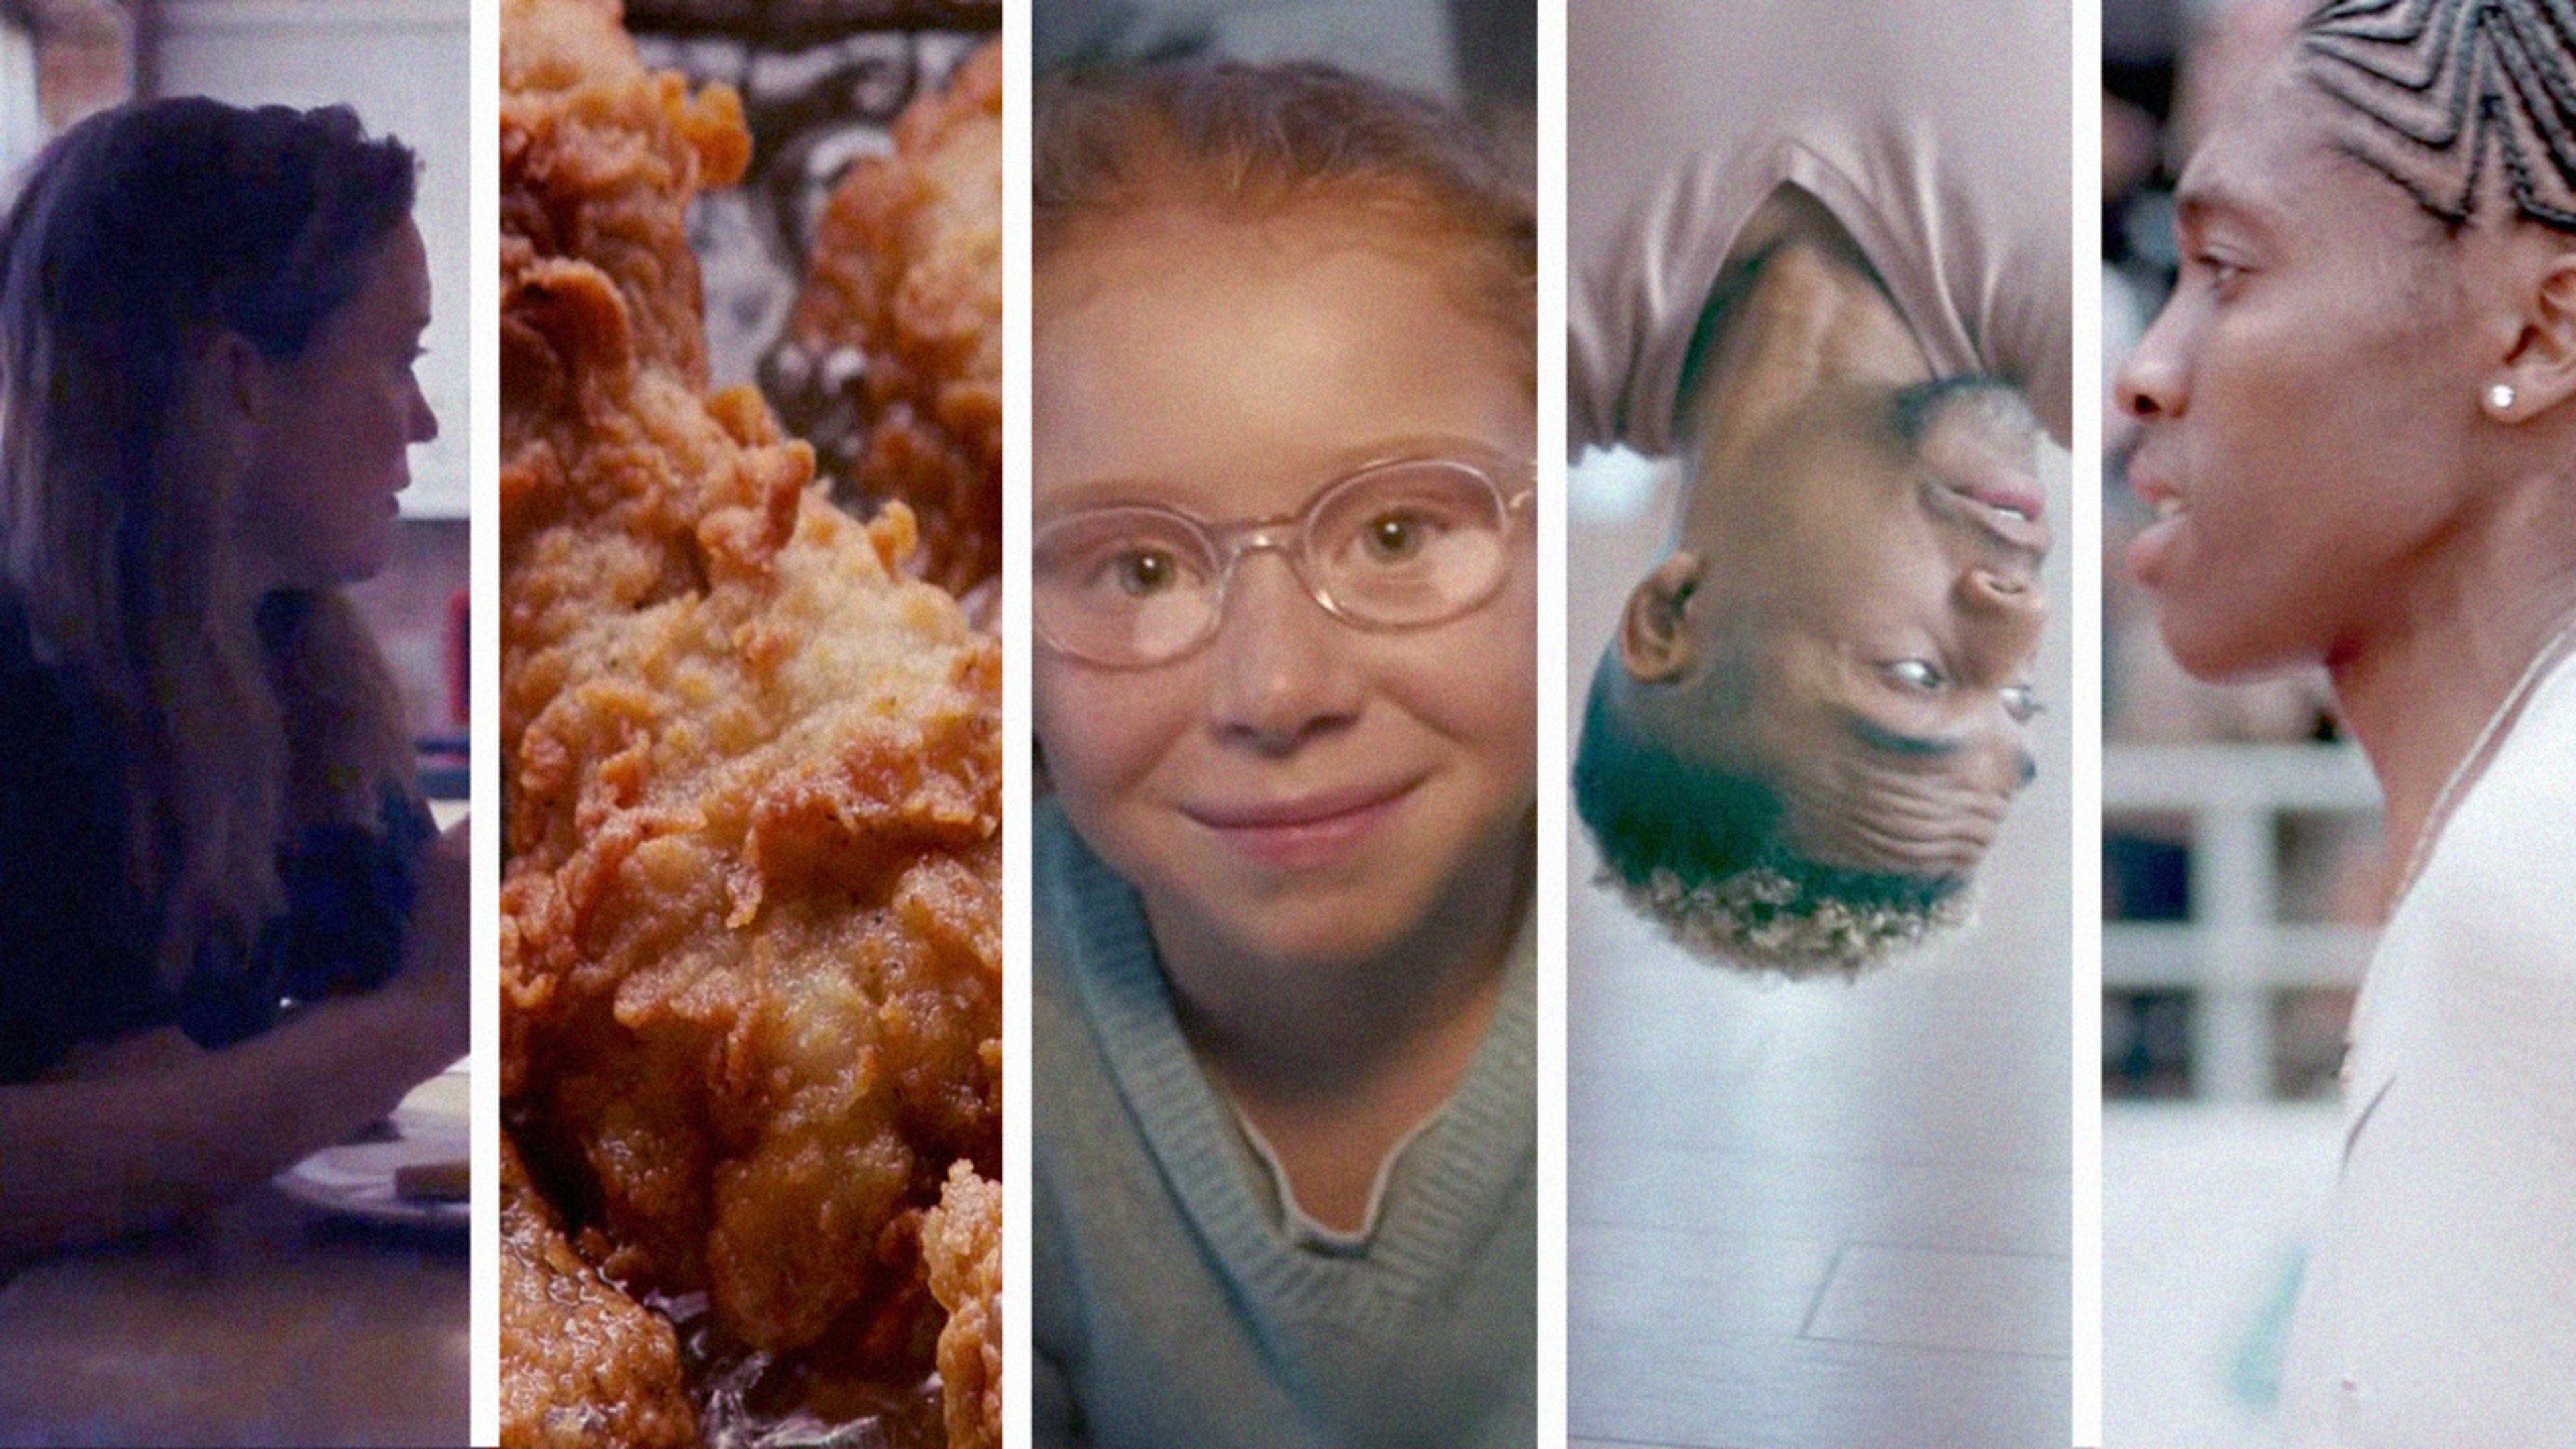 Top 5 ads of the week: Nike’s still running, Ikea makes a sequel